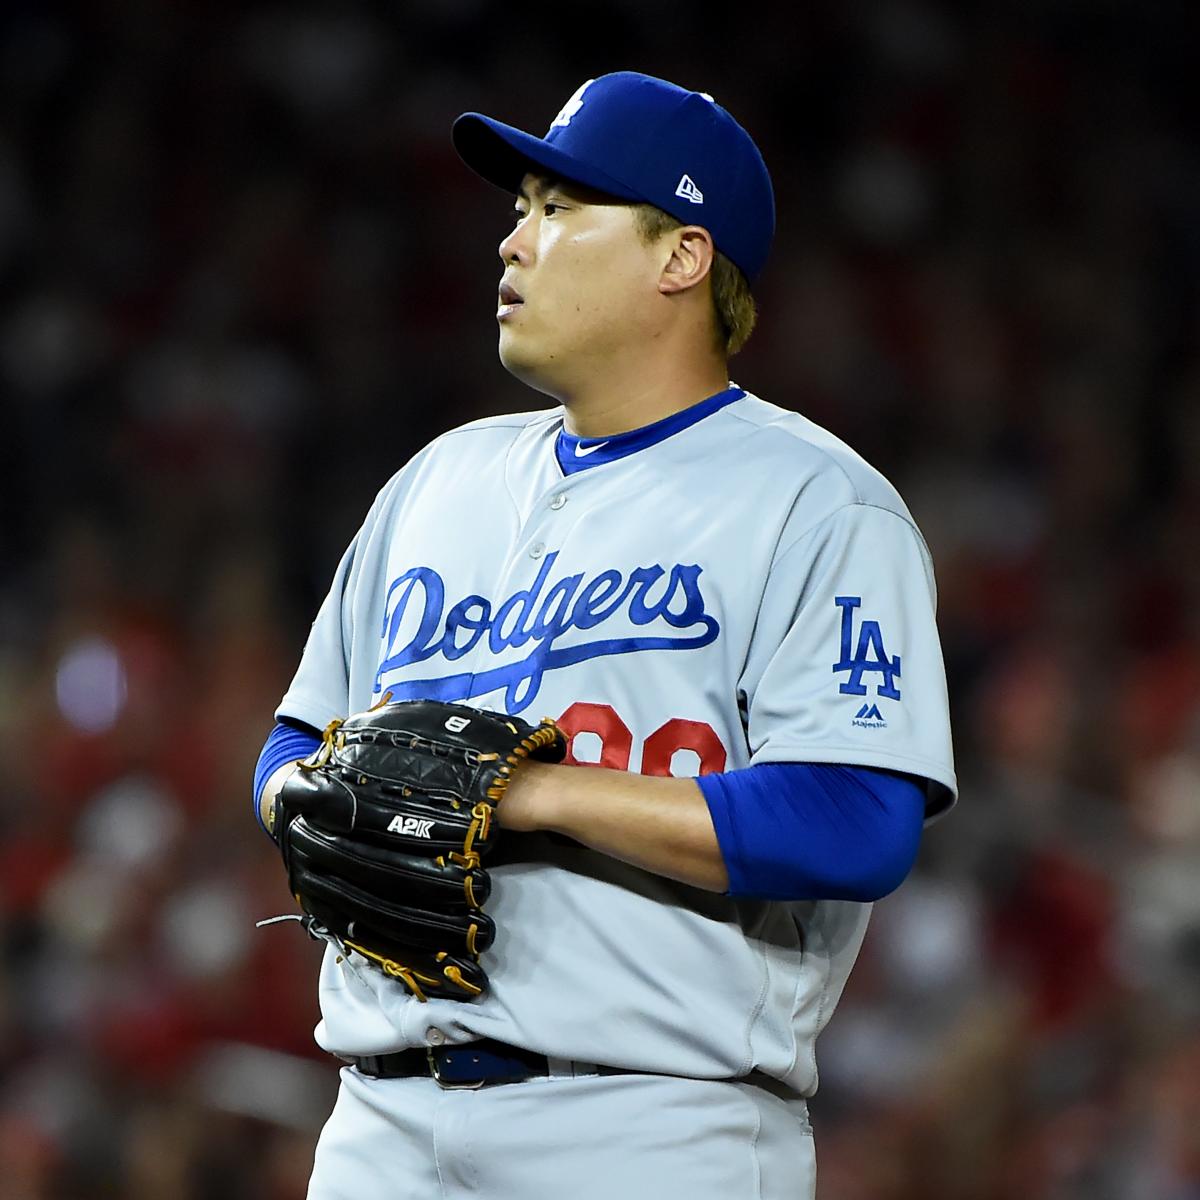 Hyun-Jin Ryu continues to dominate the offseason